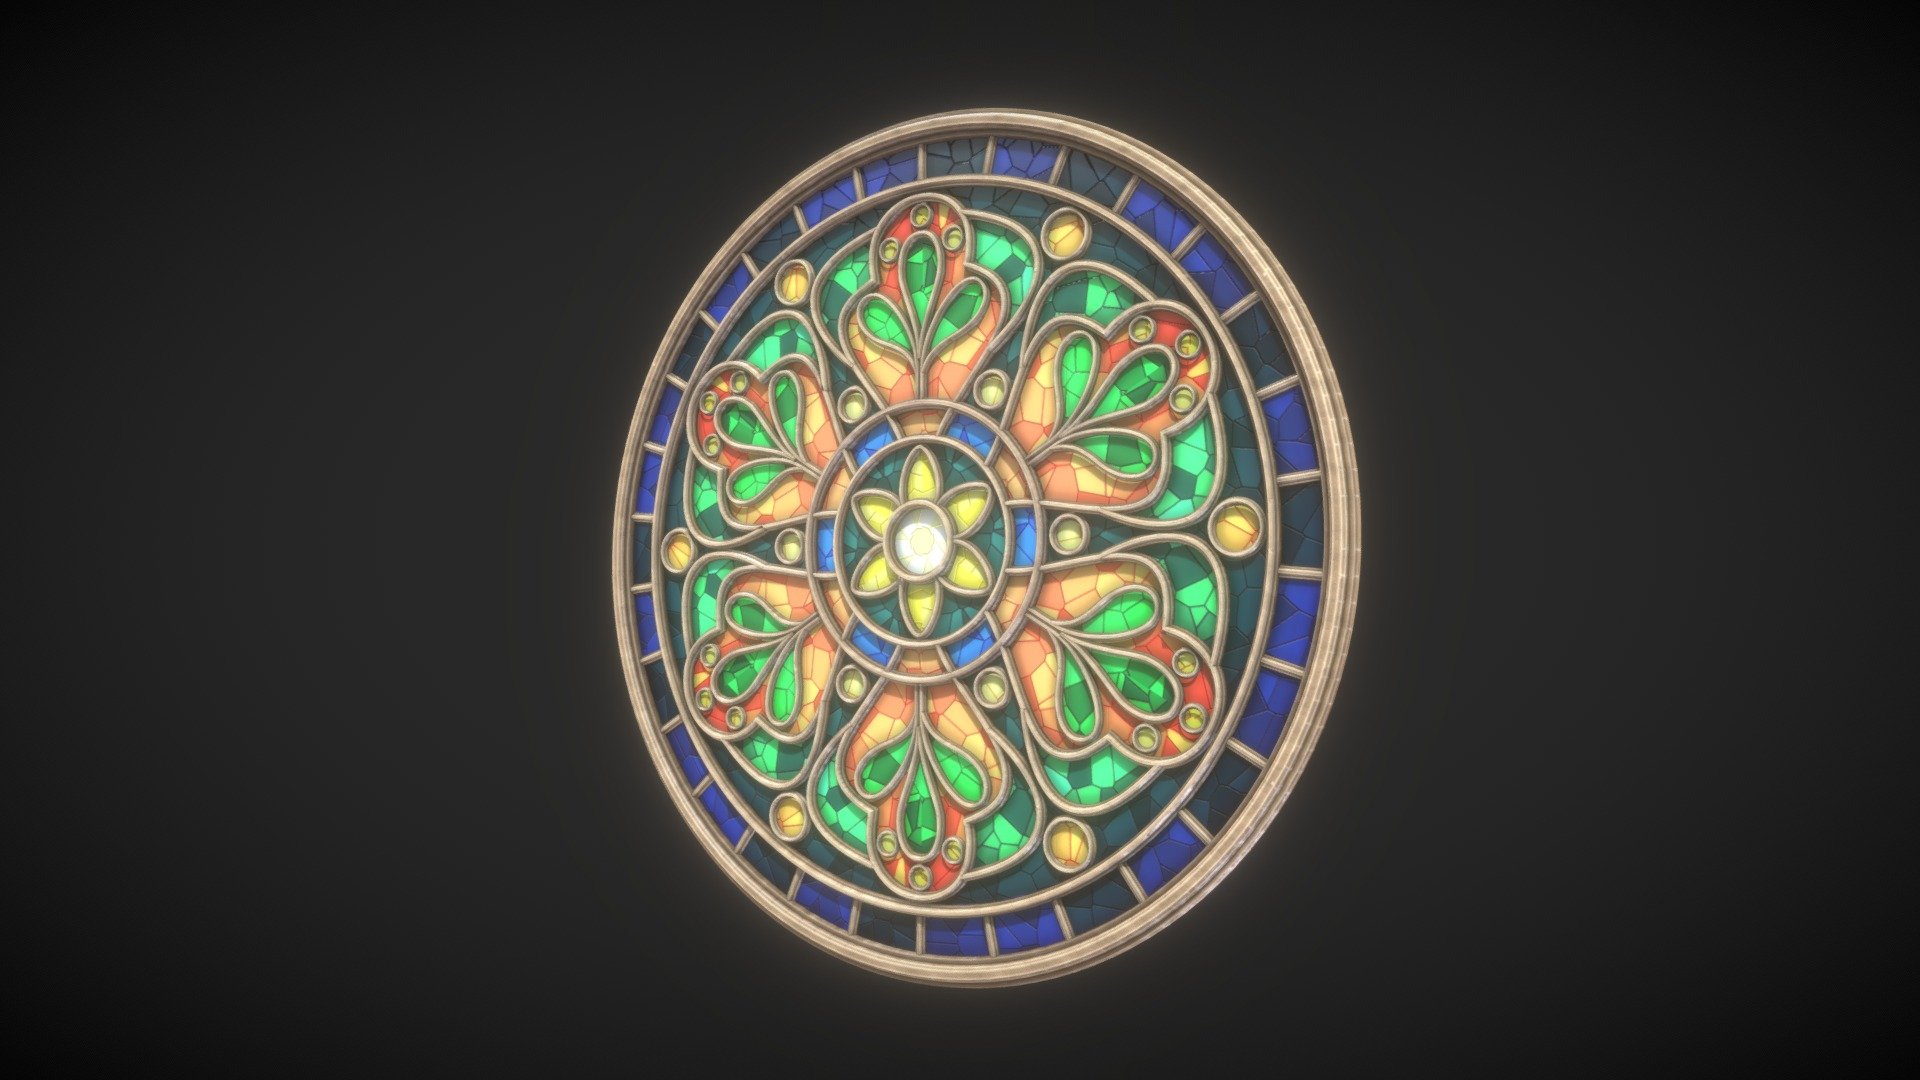 Round Gothic Rose Window 3D Model is completely ready to be used in your games, animations, films, designs etc.  

All textures and materials are included and mapped in every format. The model is completely ready for visualization in any 3d software and engine.  

Technical details:  


File formats included in the package are: FBX, OBJ, GLB, PLY, STL, ABC, DAE, BLEND, gLTF (generated), USDZ (generated)
Native software file format: BLEND
Render engine: Eevee
Polygons: 163,816
Vertices: 181,652
Textures: Base, Metallic, Mixed AO, Normal, Roughness
All textures are 2k resolution.

Note:  


Two versions of the model are included: 2-sided window (polygons: 163,816, vertices: 181,652) and 1-sided window (polygons: 81,908, vertices: 90,763).
 - Round Gothic Rose Window 3D Model - Buy Royalty Free 3D model by 3DDisco 3d model